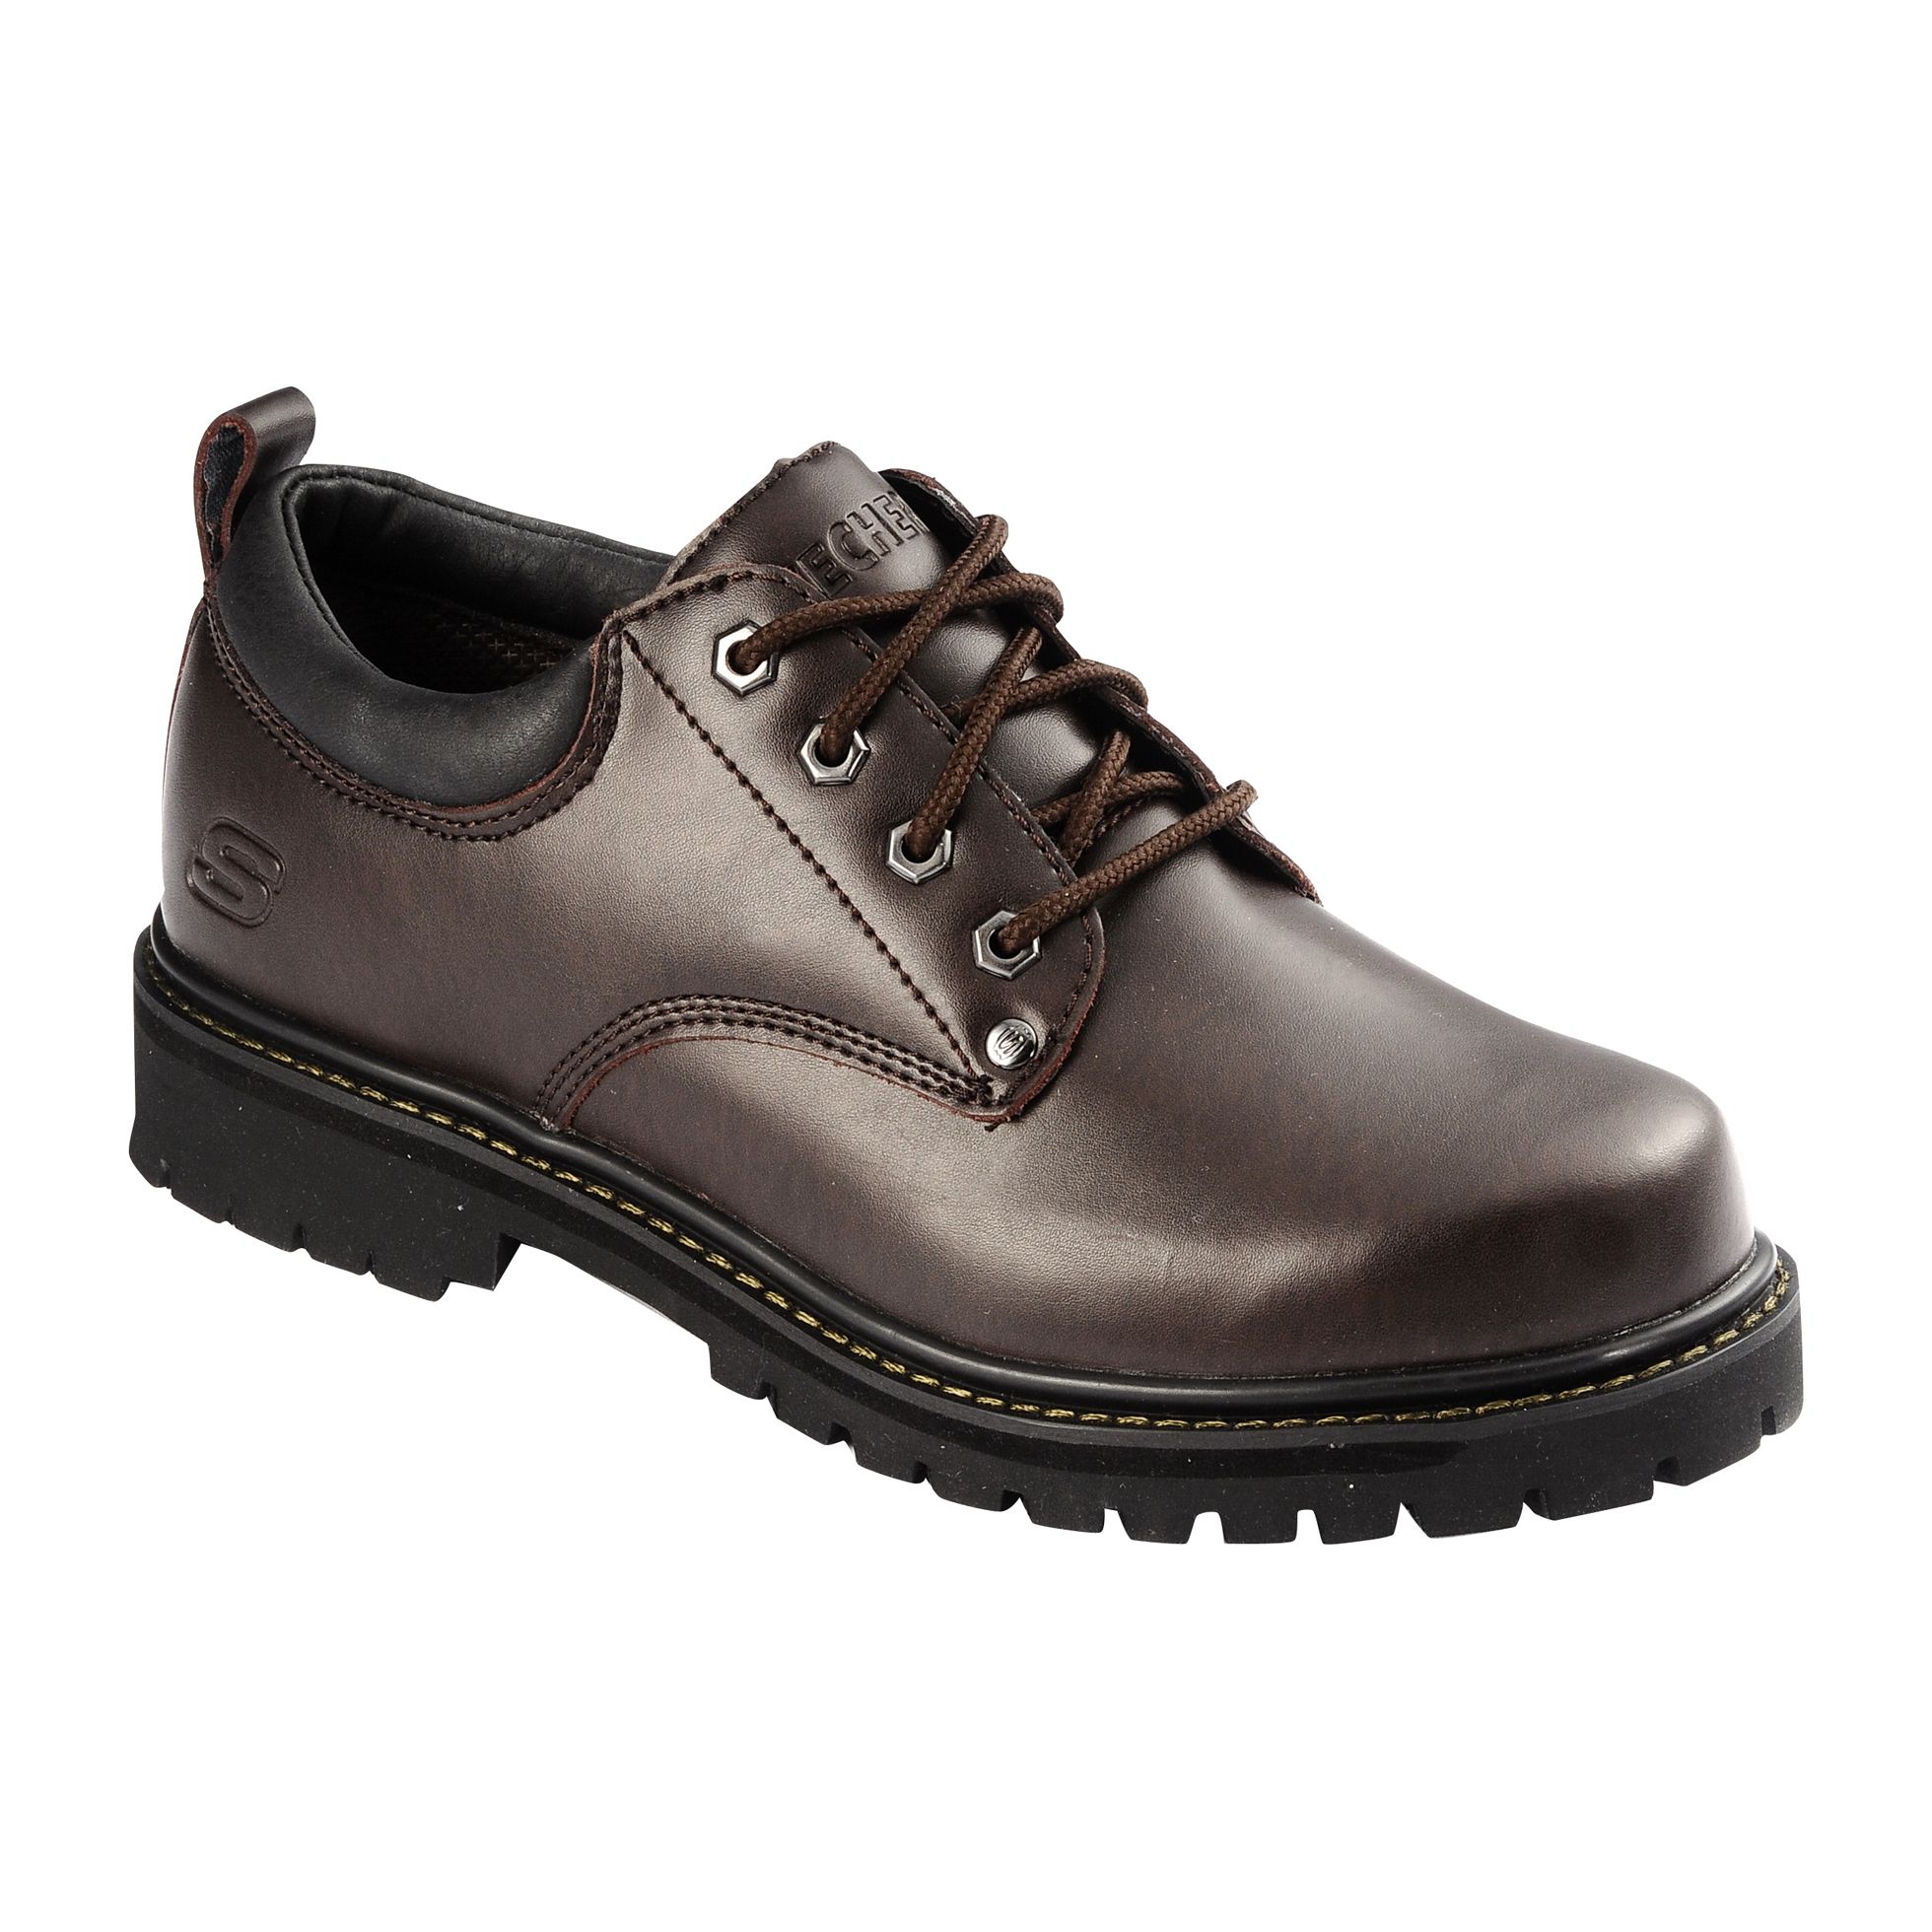 Men's Alley Cats Casual Oxford- Brown